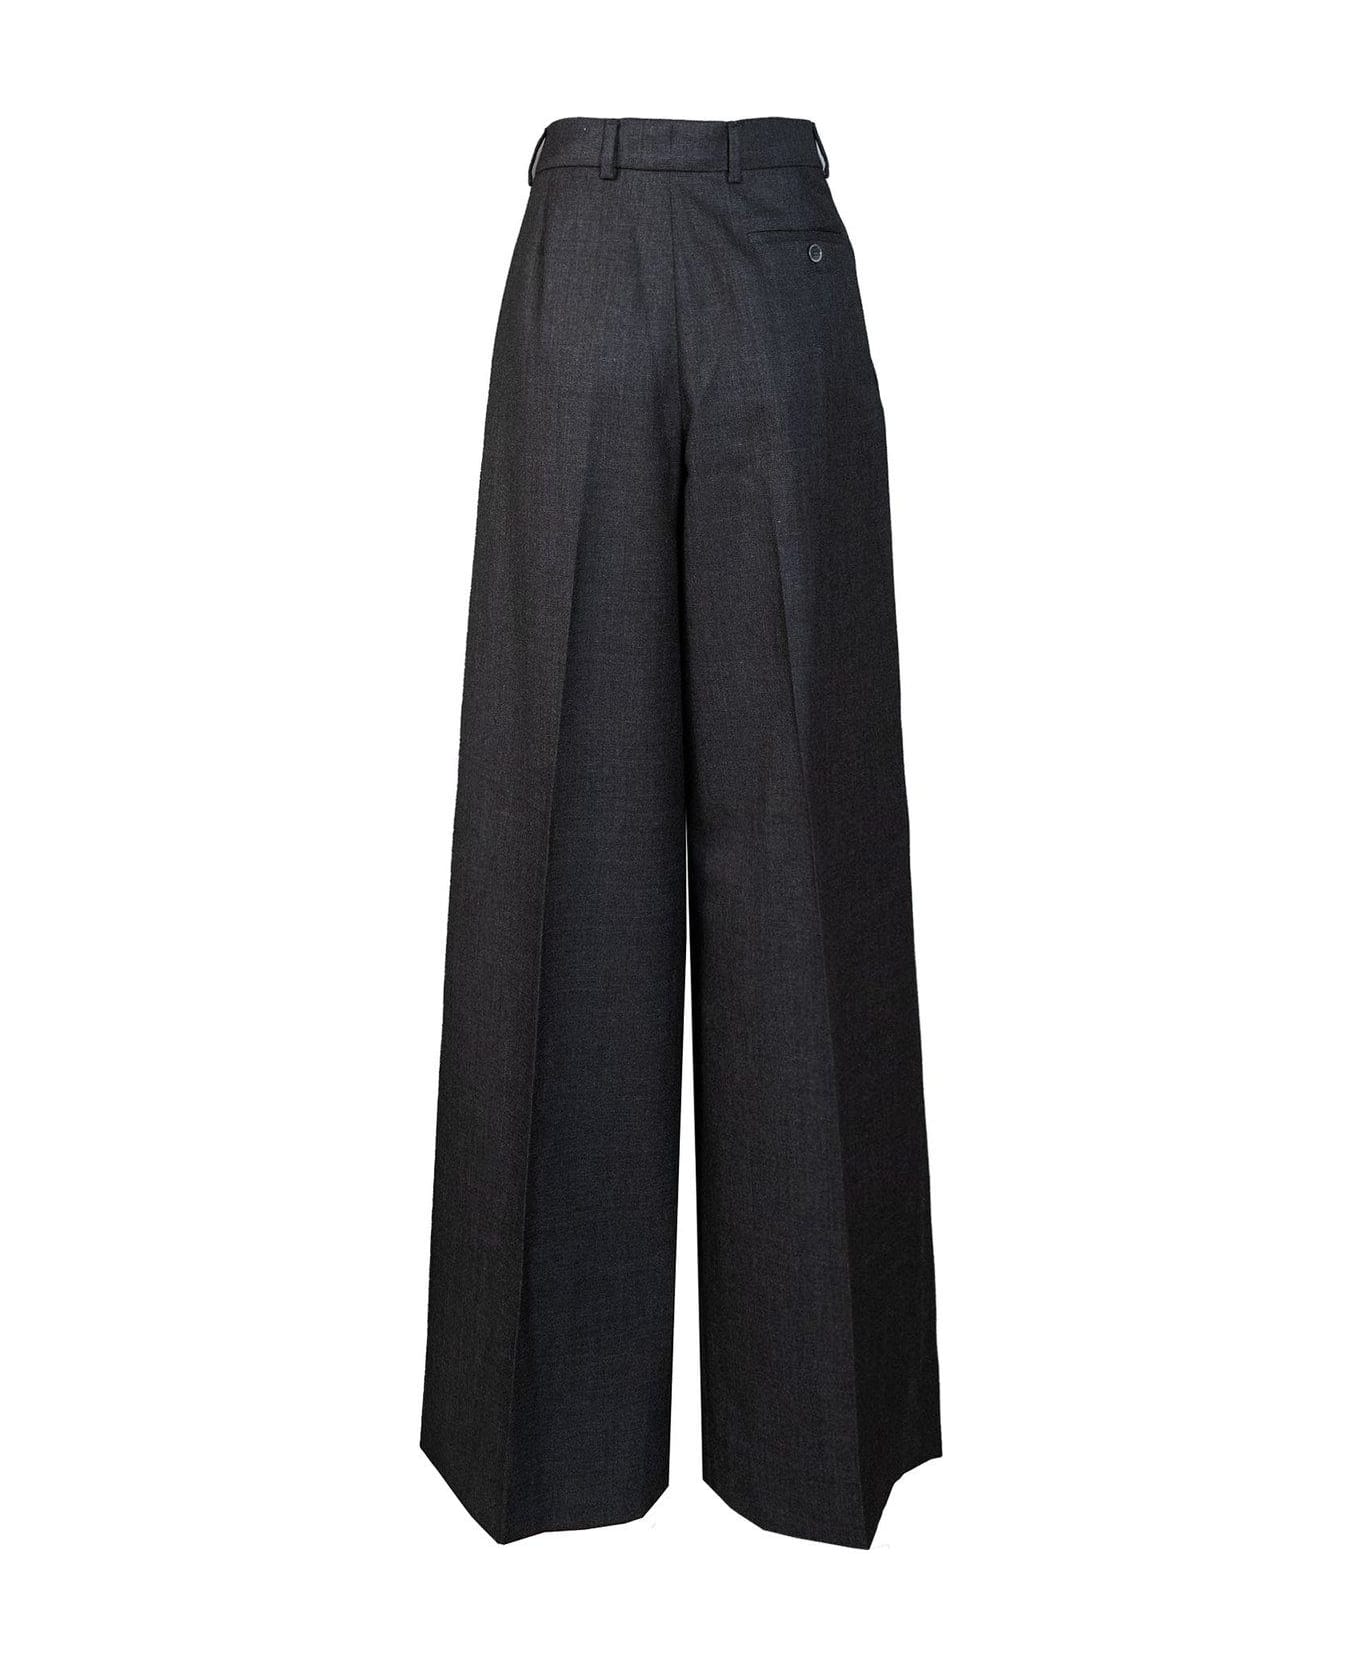 Acne Studios Tailored Wrap Trousers - GREY